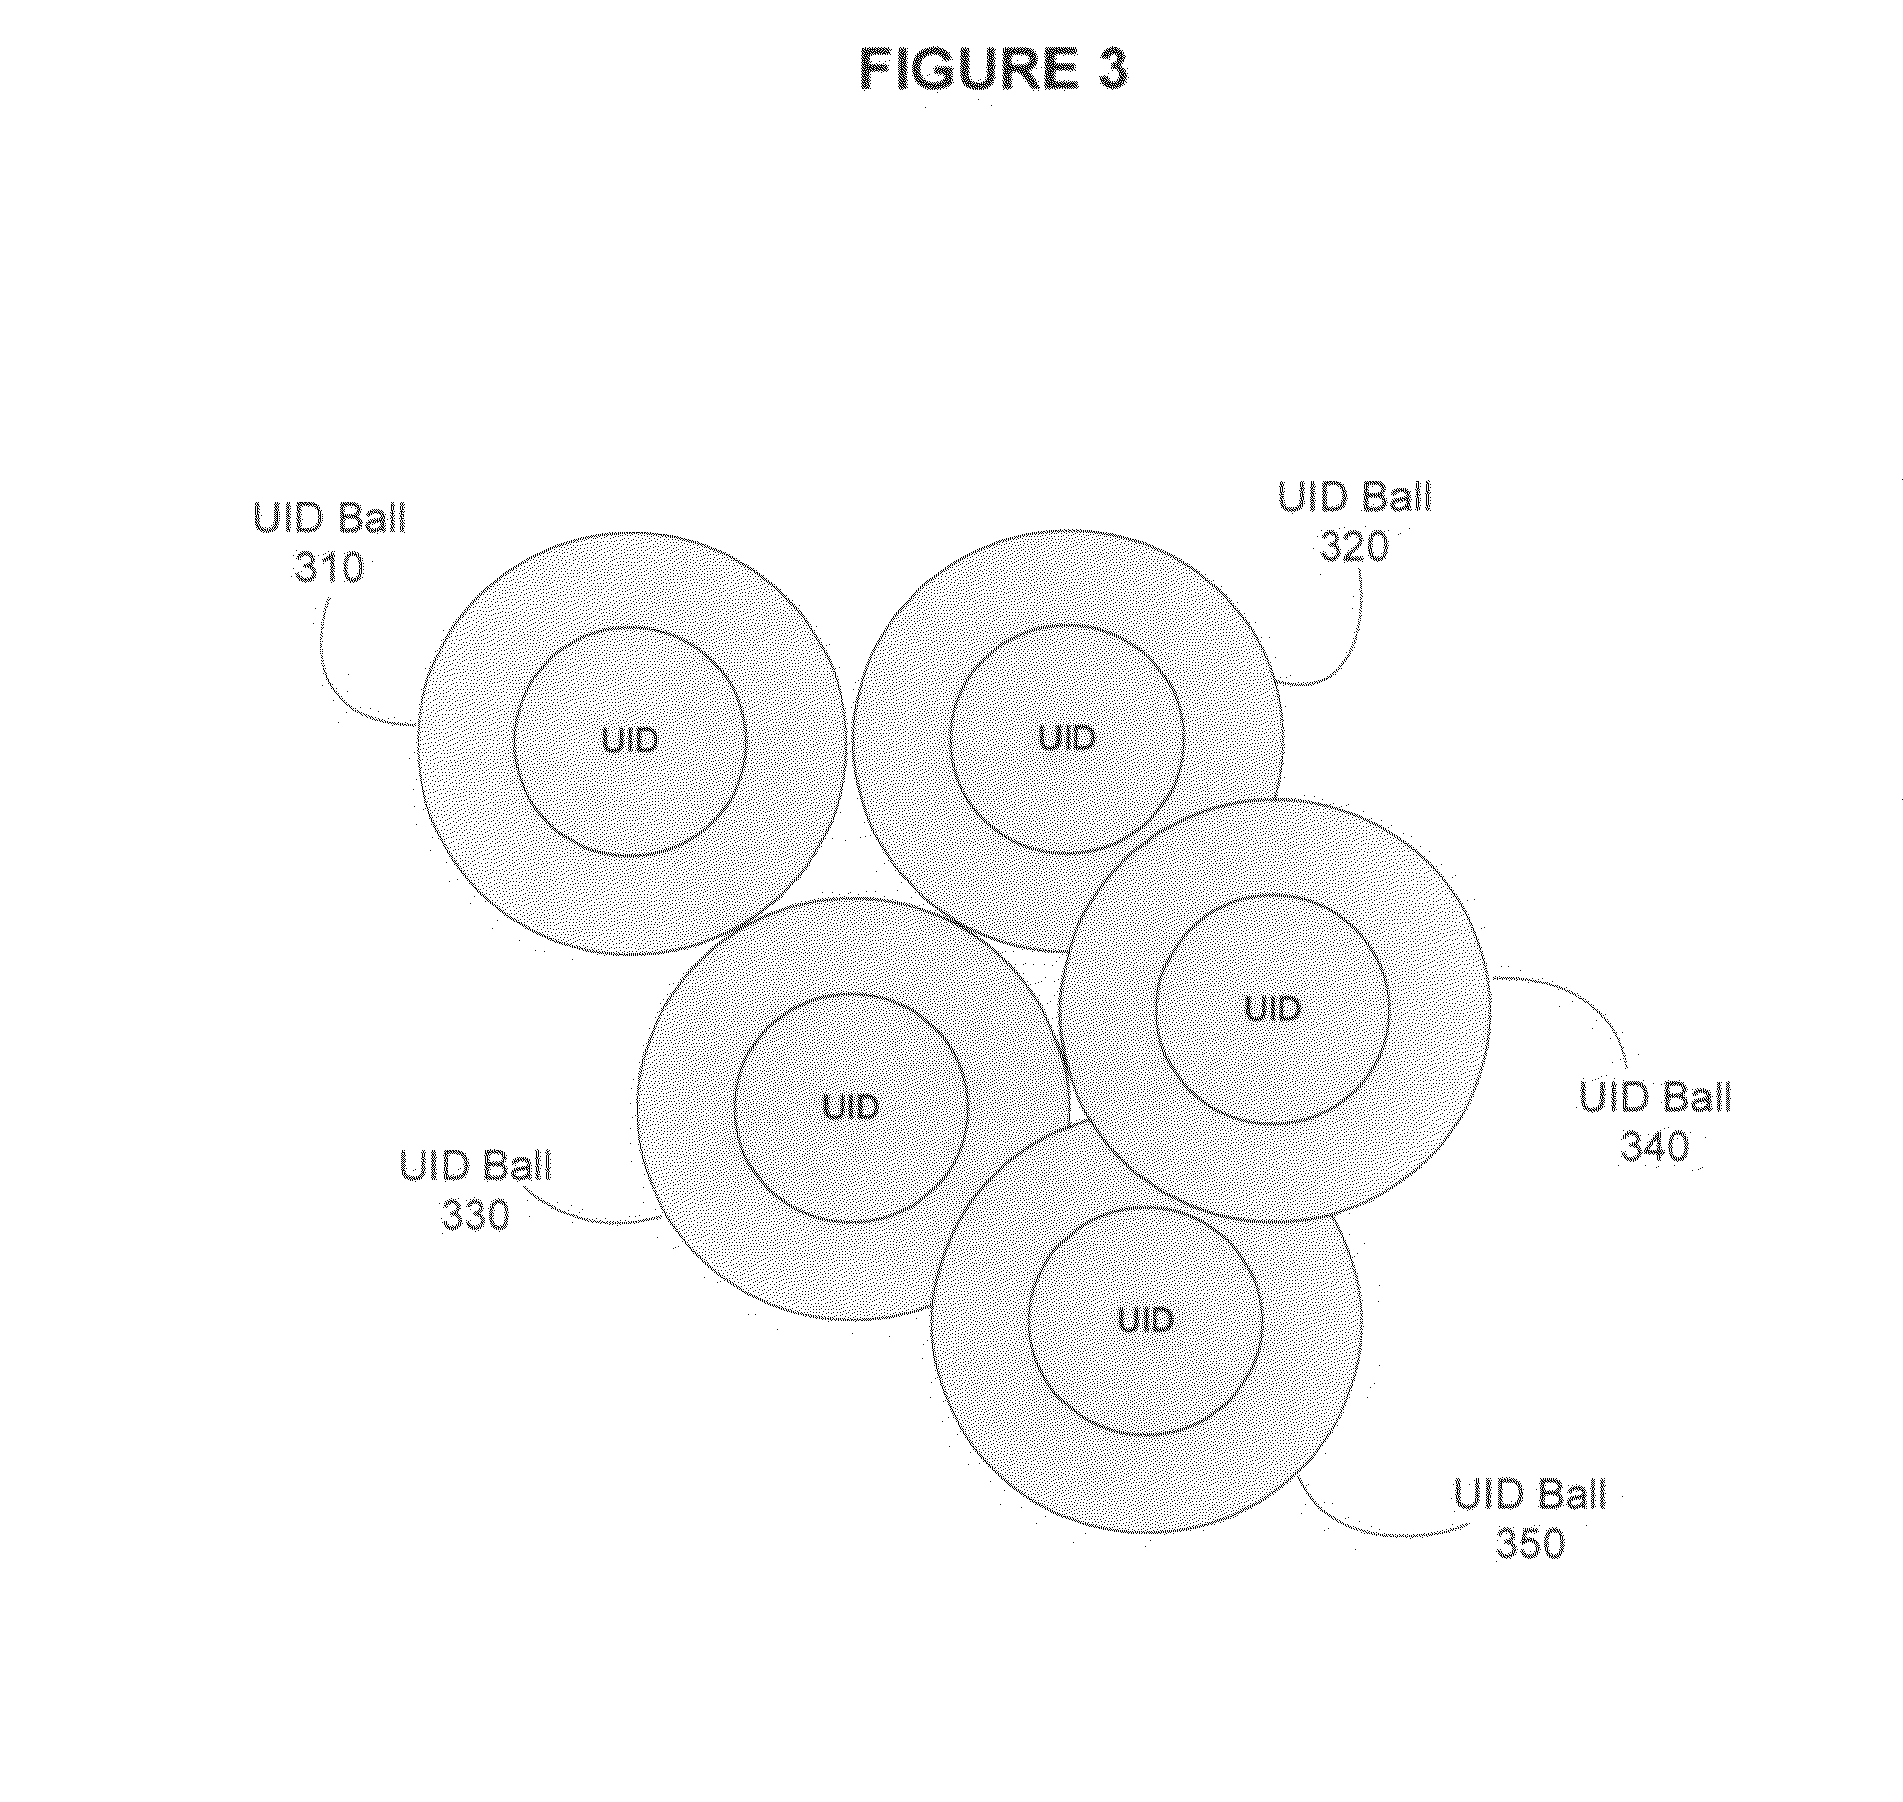 System and method for identification of individual samples from a multiplex mixture